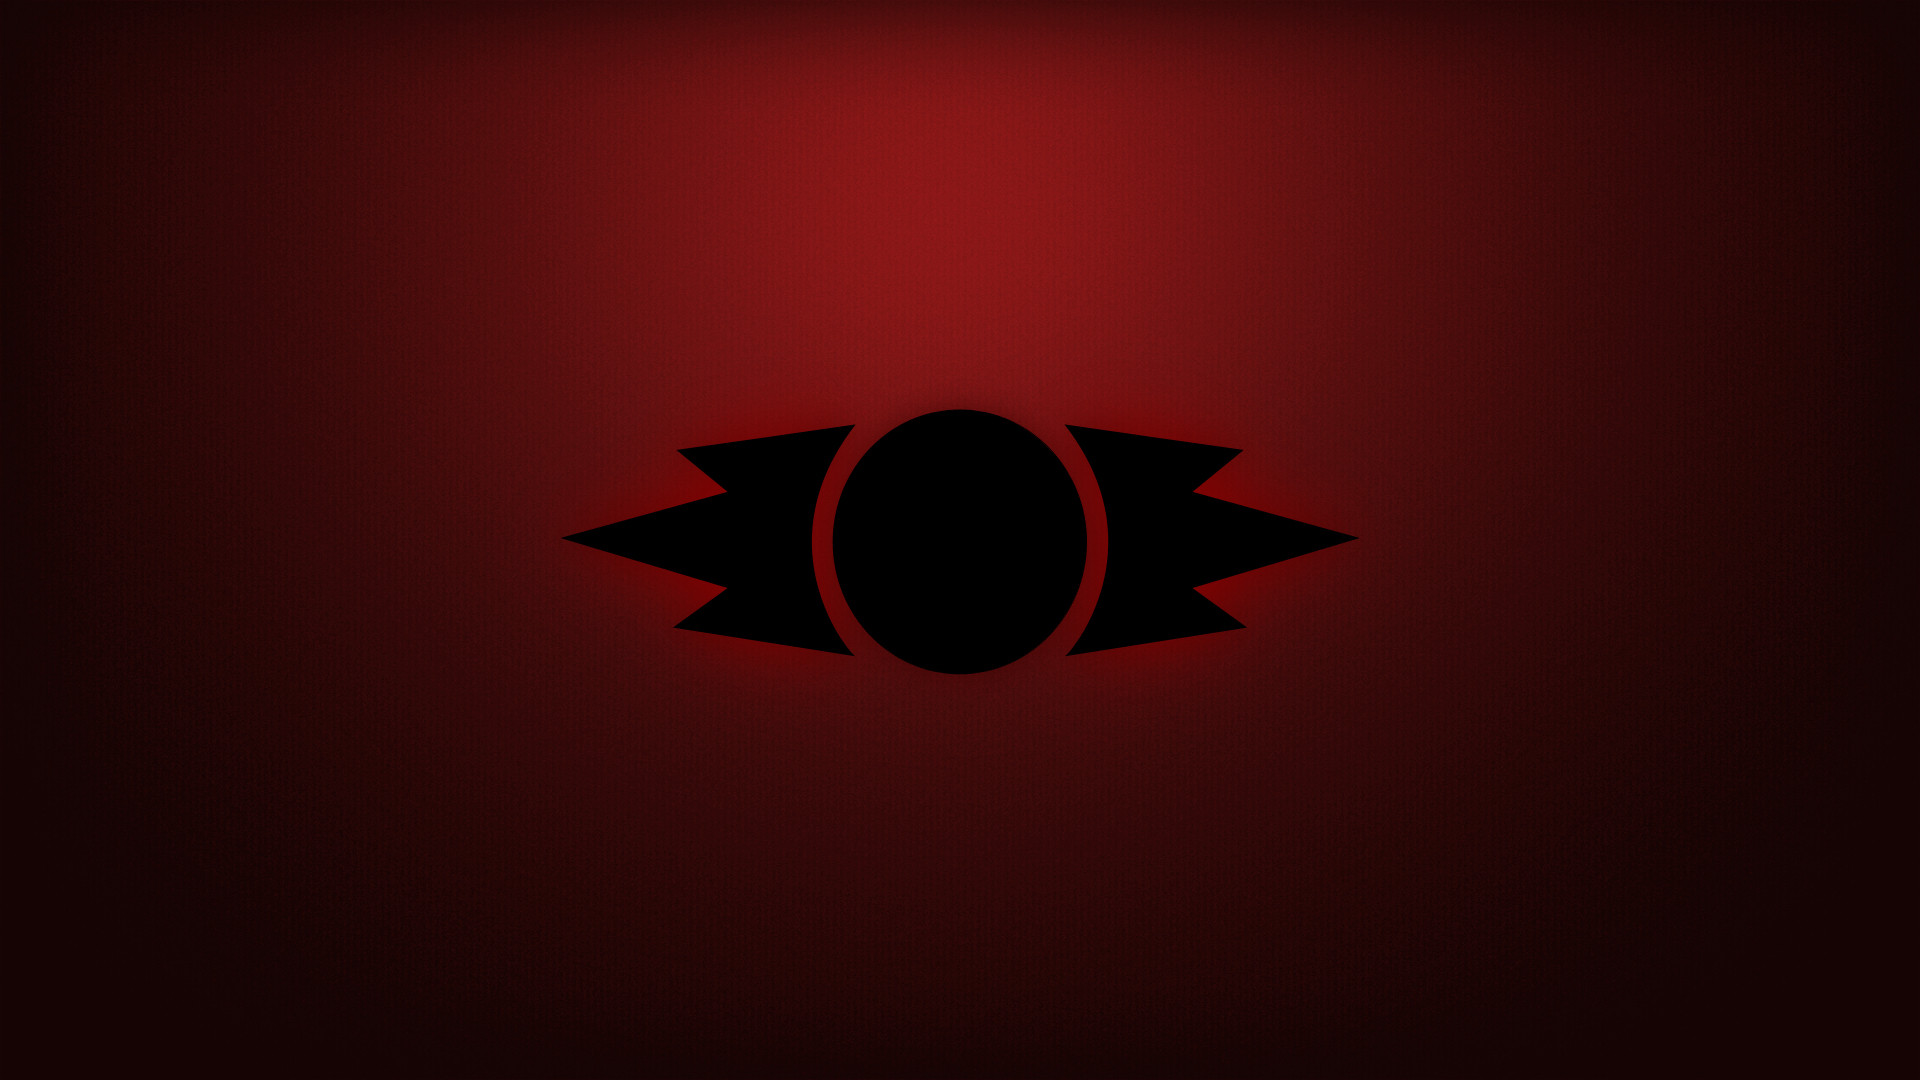 Sith Empire Logo Heres a lighter sith one